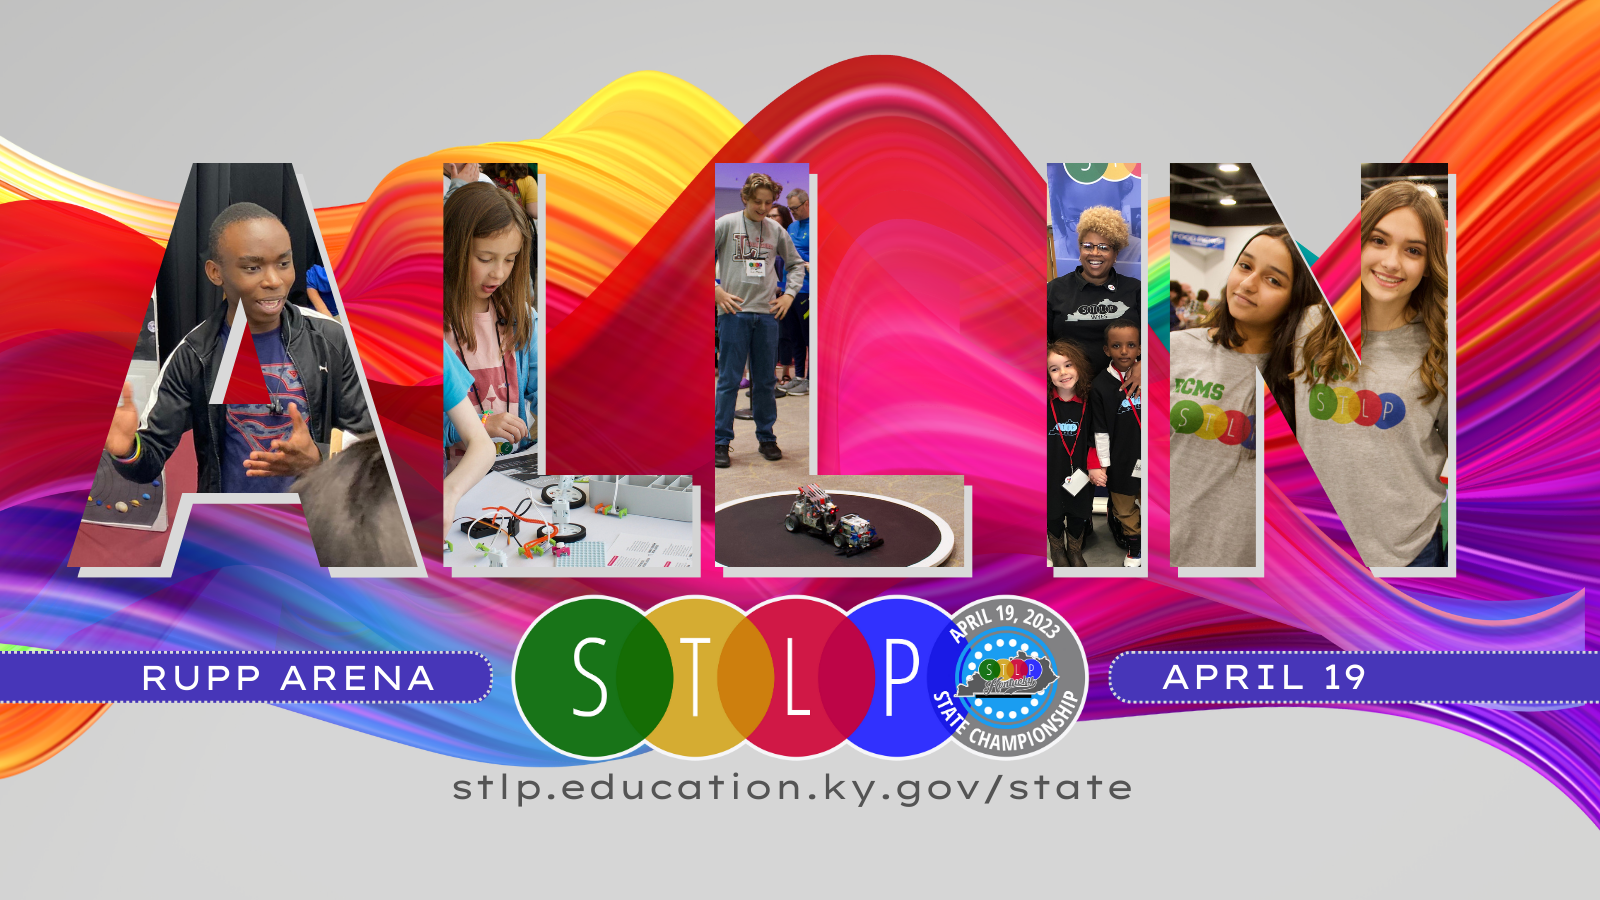 STLP State Championship is April 19 at Rupp Arena and everyone is urged to go "all in" for the event